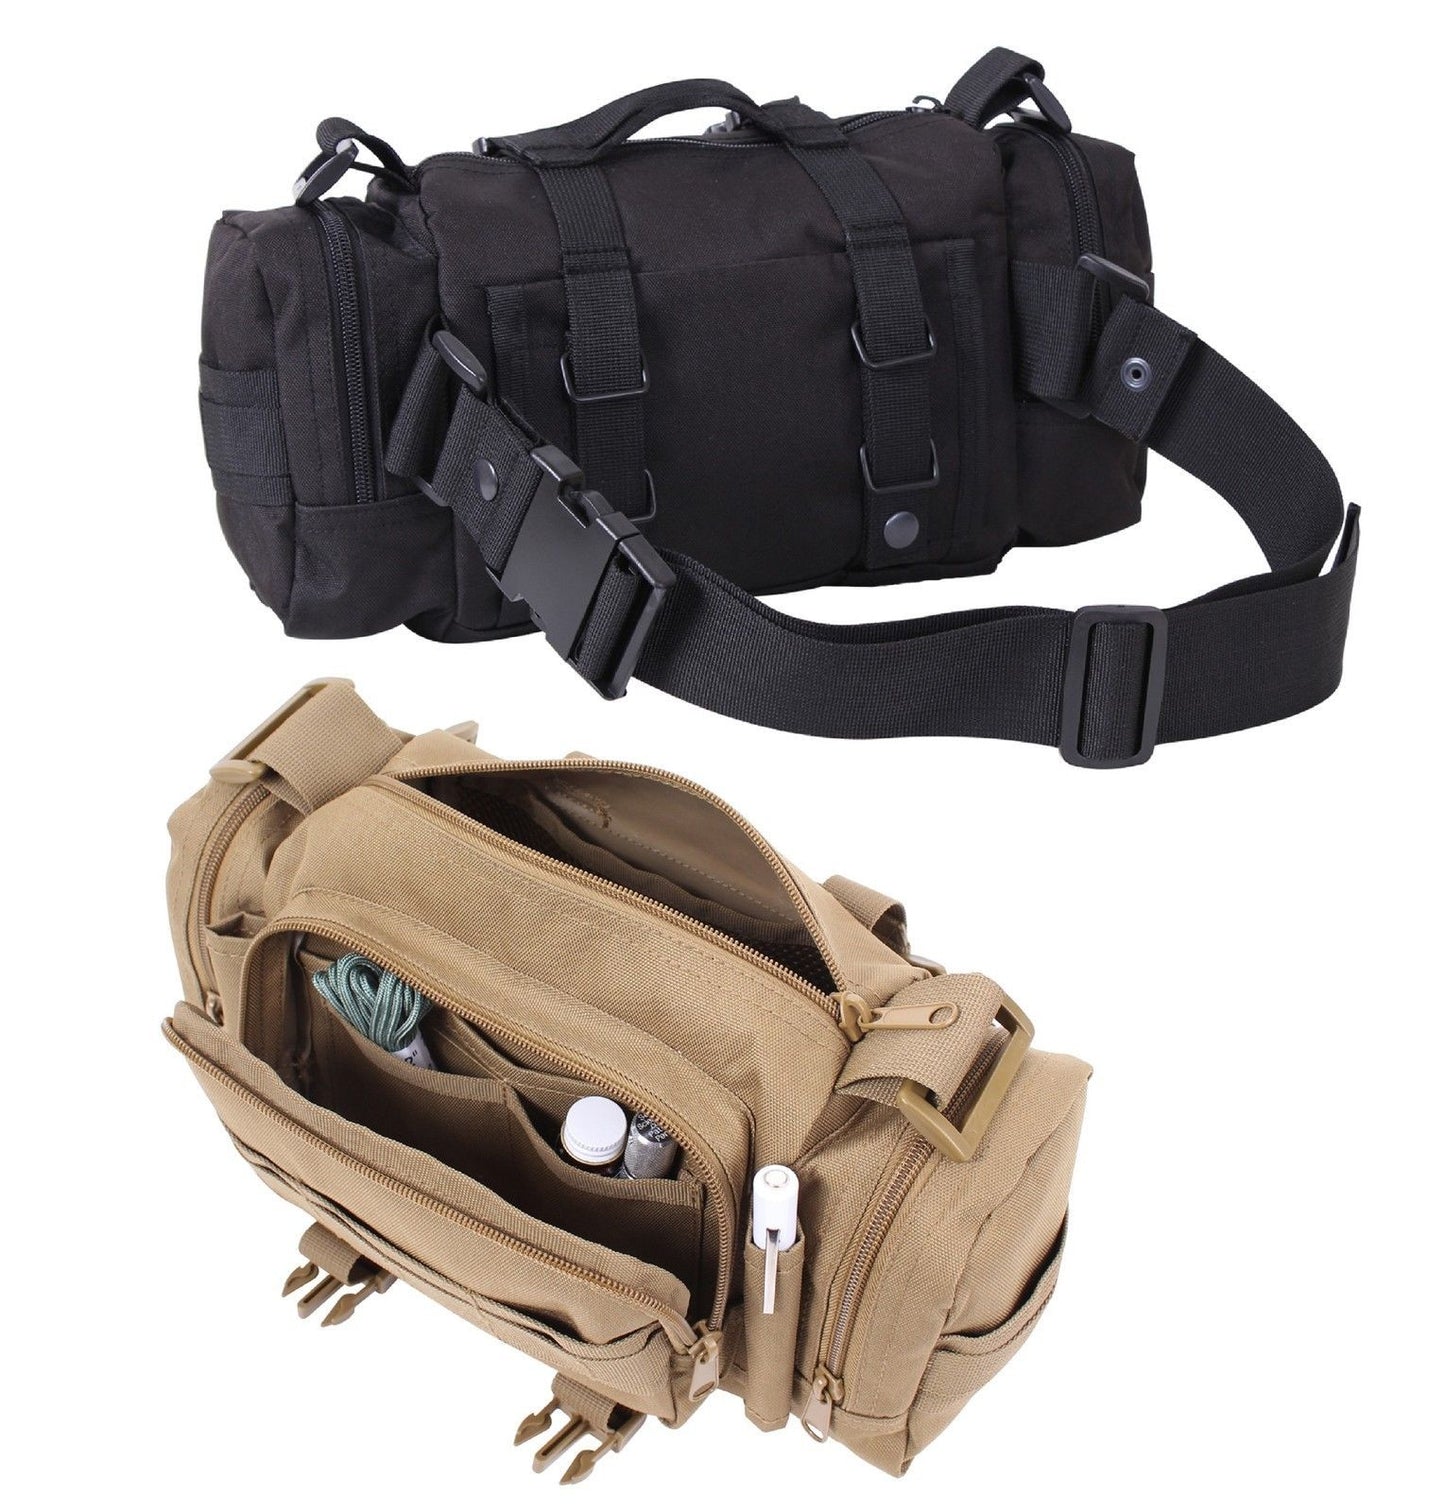 14" Tactical Converti-Pack Bag - MOLLE Convertible Pack